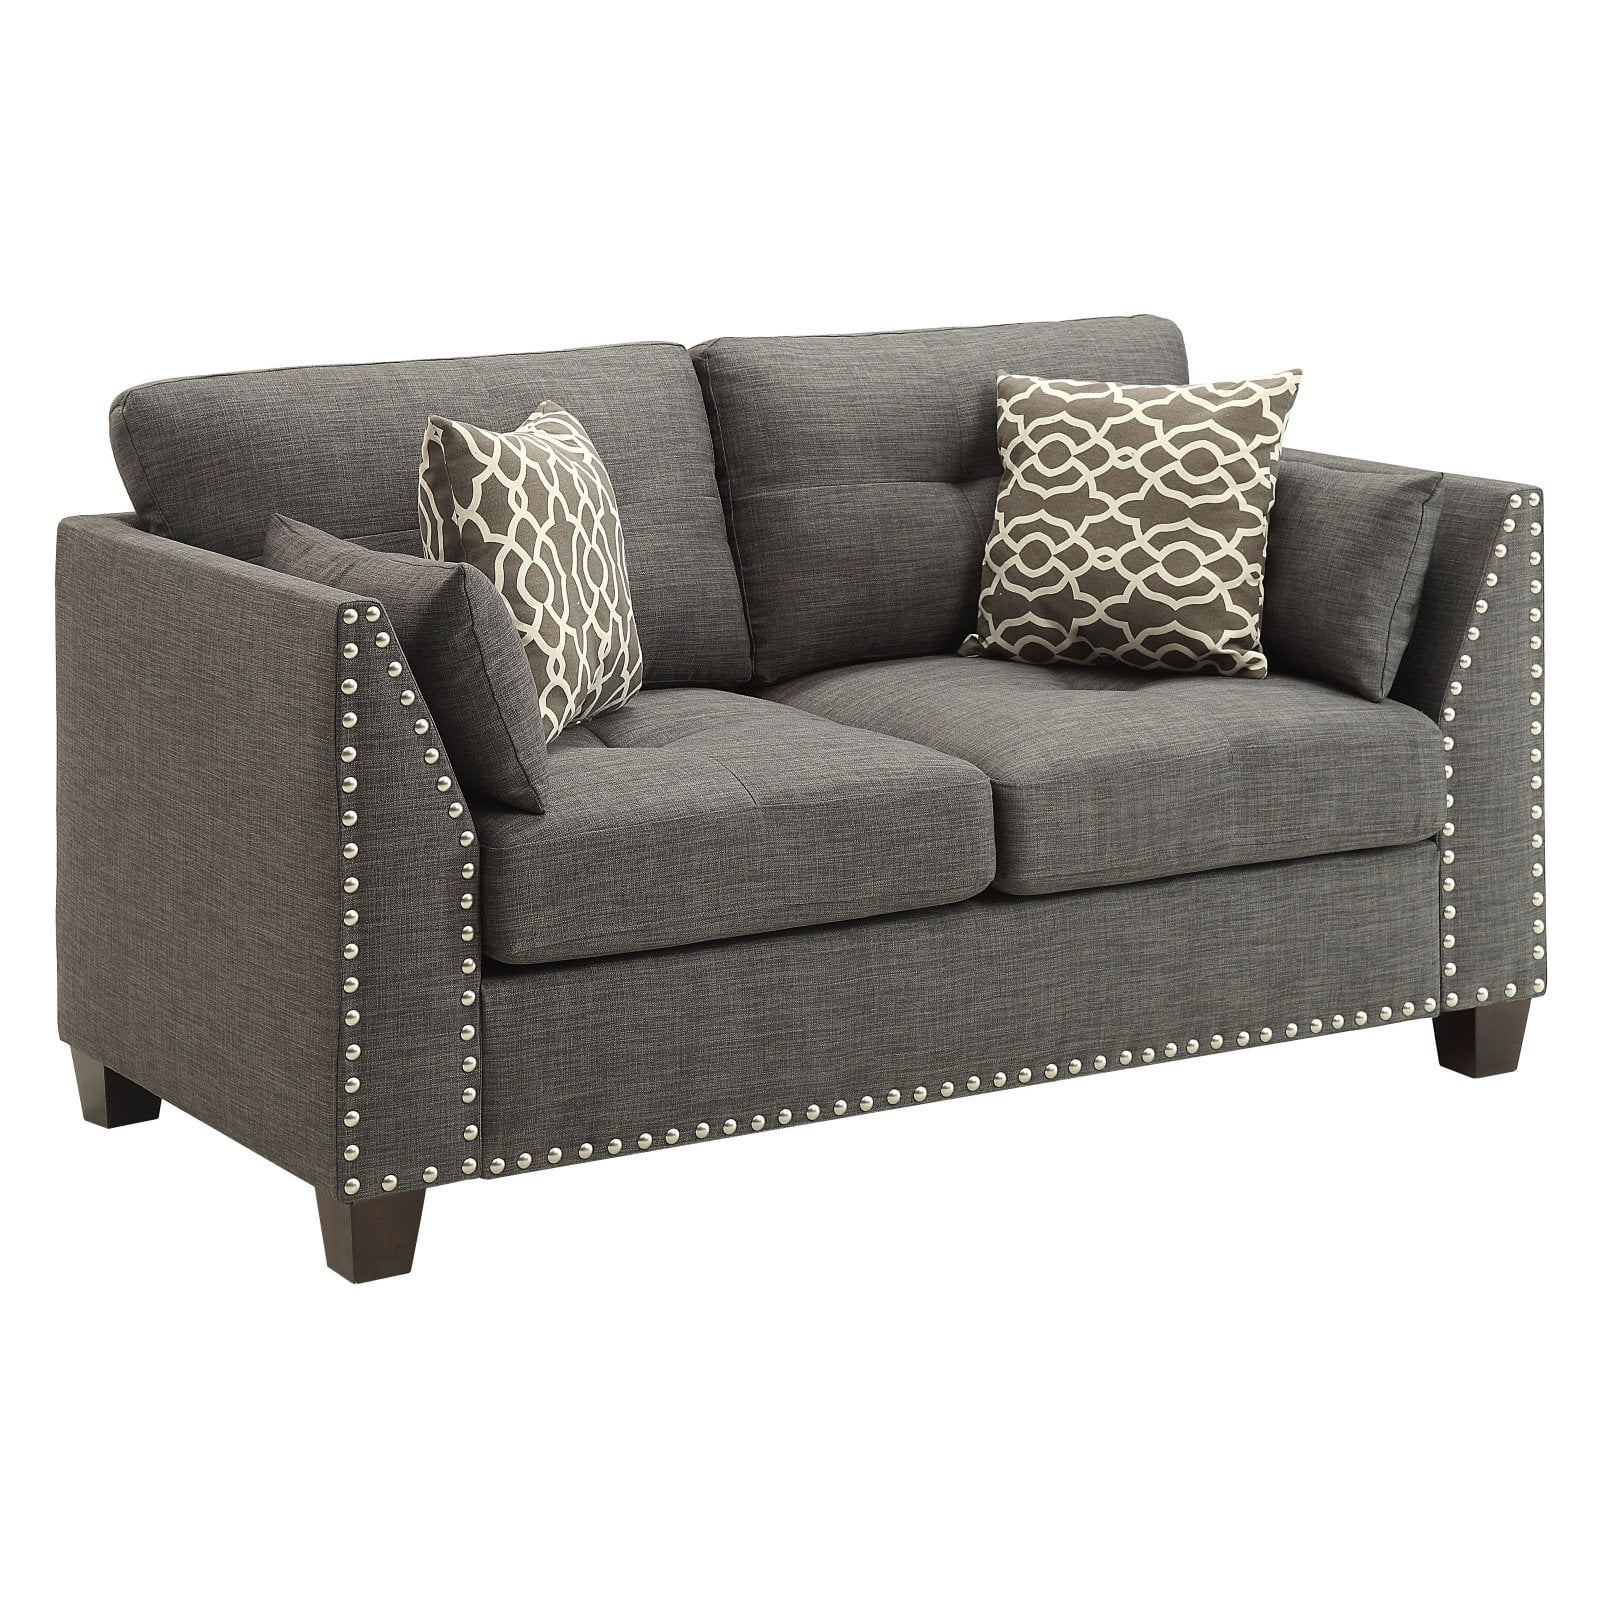 Picture of ACME 52406 Laurissa Loveseat with 4 Pillows - Light Charcoal Linen - 35 x 58 x 31 in.